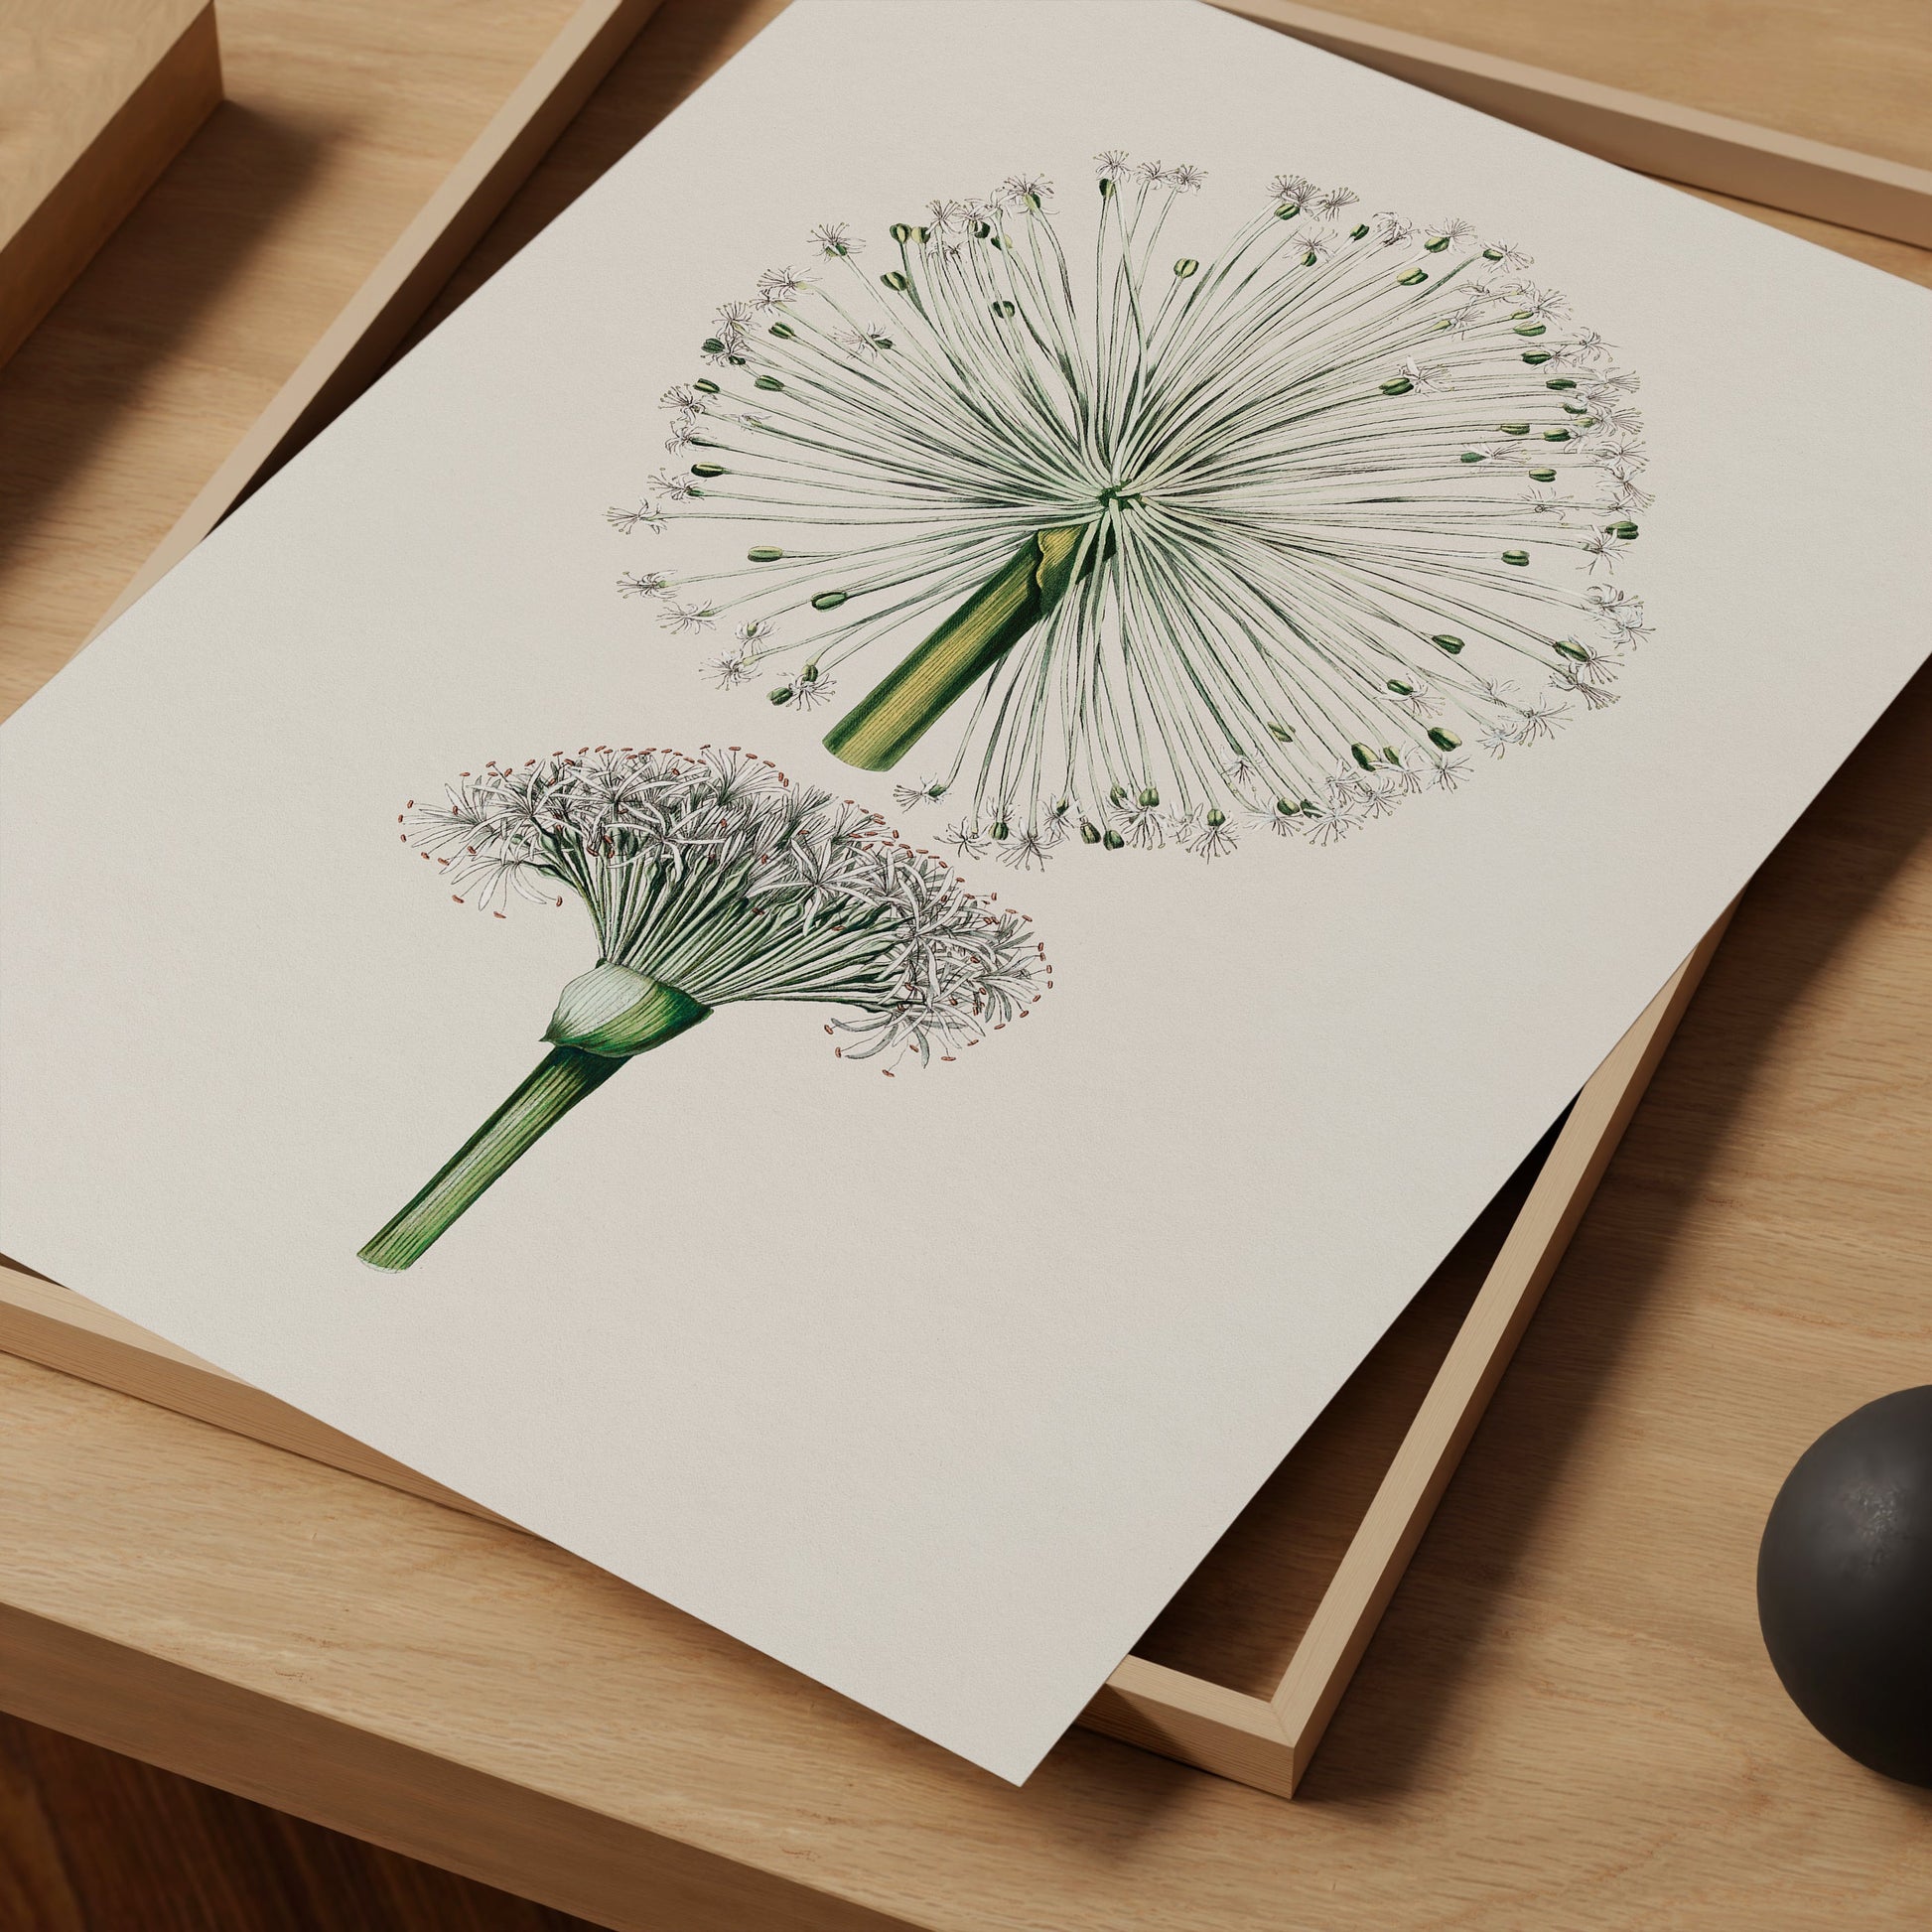 a picture of a dandelion on a table